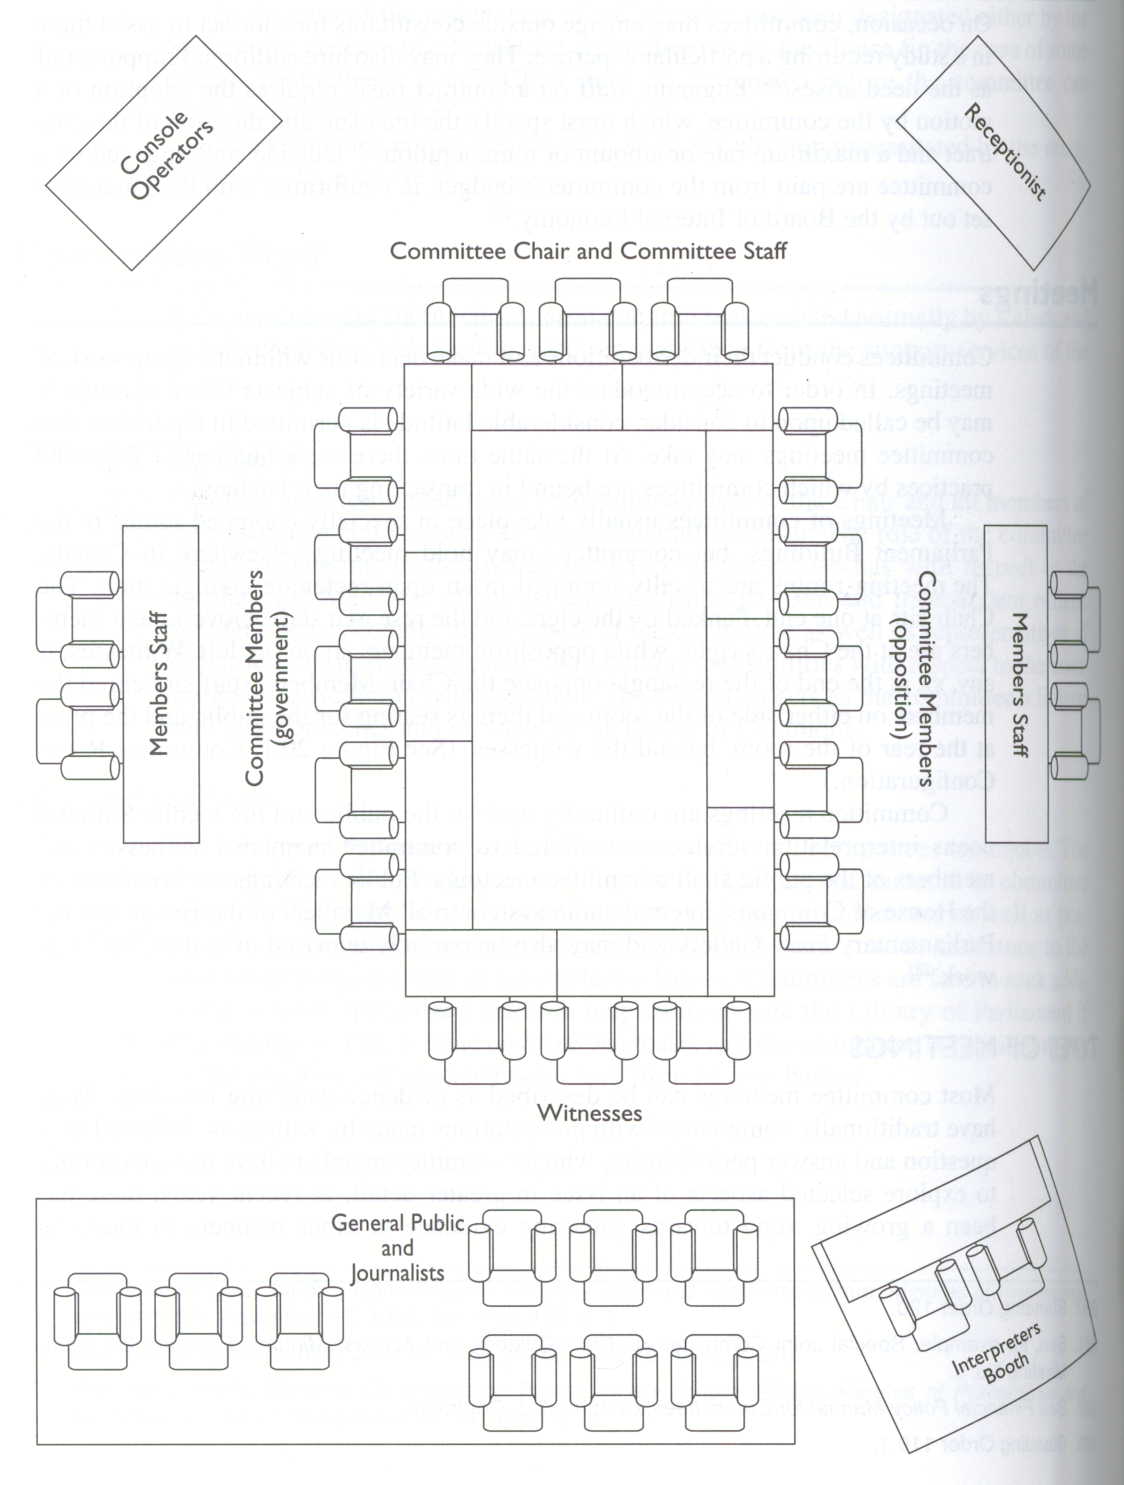 Graphic representation a committee room. In the centre of the room are a series of tables, set in a rectangle, with chairs around the periphery representing the seats for committee members. At the top of rectangle of tables are seats for the committee chair, clerk and research staff. To the right and left of these tables are tables and chairs for Members’ staff. To the top left of the image is a box representing the console operator and to the top left, the receptionist. To the bottom of the image are seats for the public and journalists and a booth for interpreters.